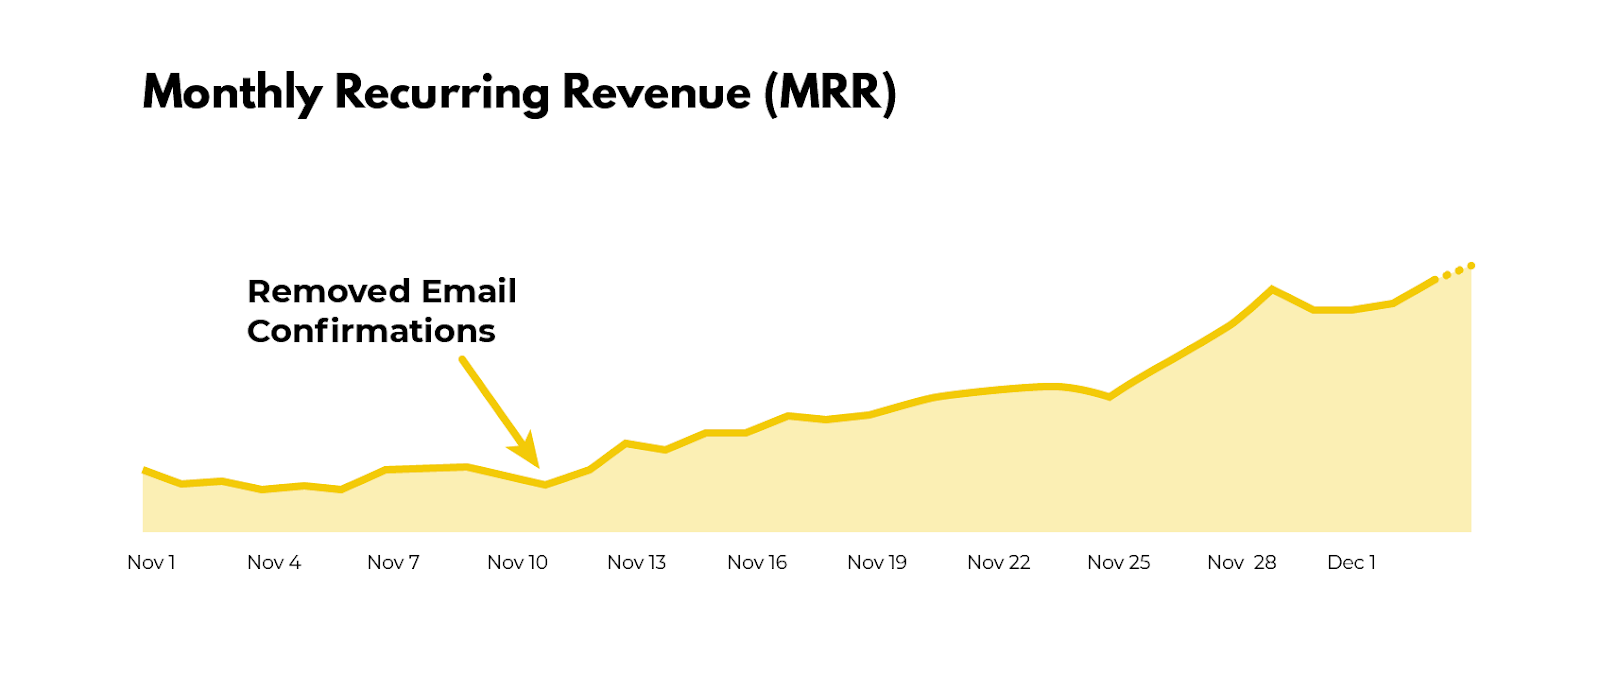 An image showing the increase of Snappa's monthly recurring revenue (MRR) after removing email confirmations